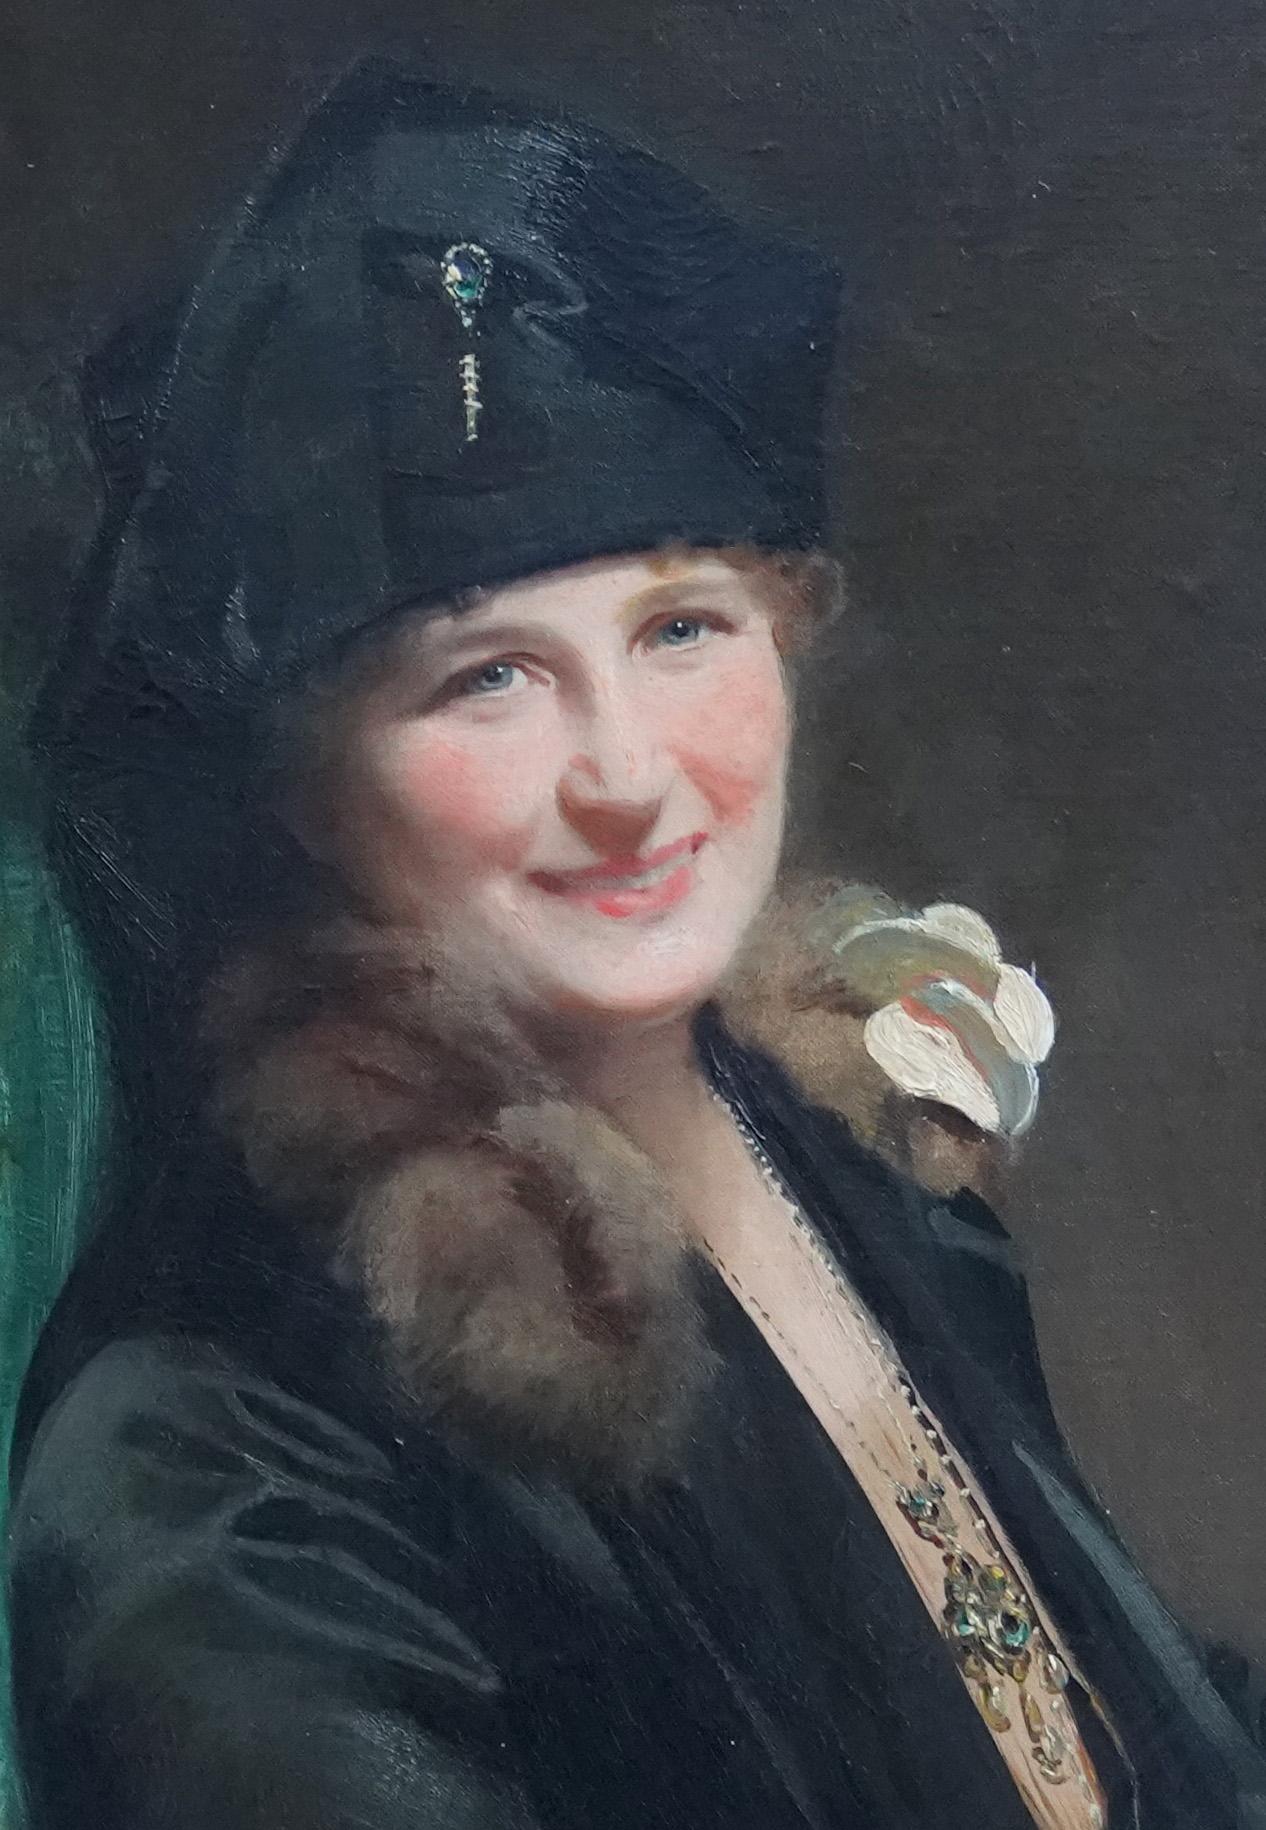 This lovely British portrait oil painting is by noted portrait artist Francis 'Frank' Owen Salisbury. It was painted in 1927 in New York and exhibited the following year at the Royal Academy London, entitled The Artist's Wife. The sitter, Alice